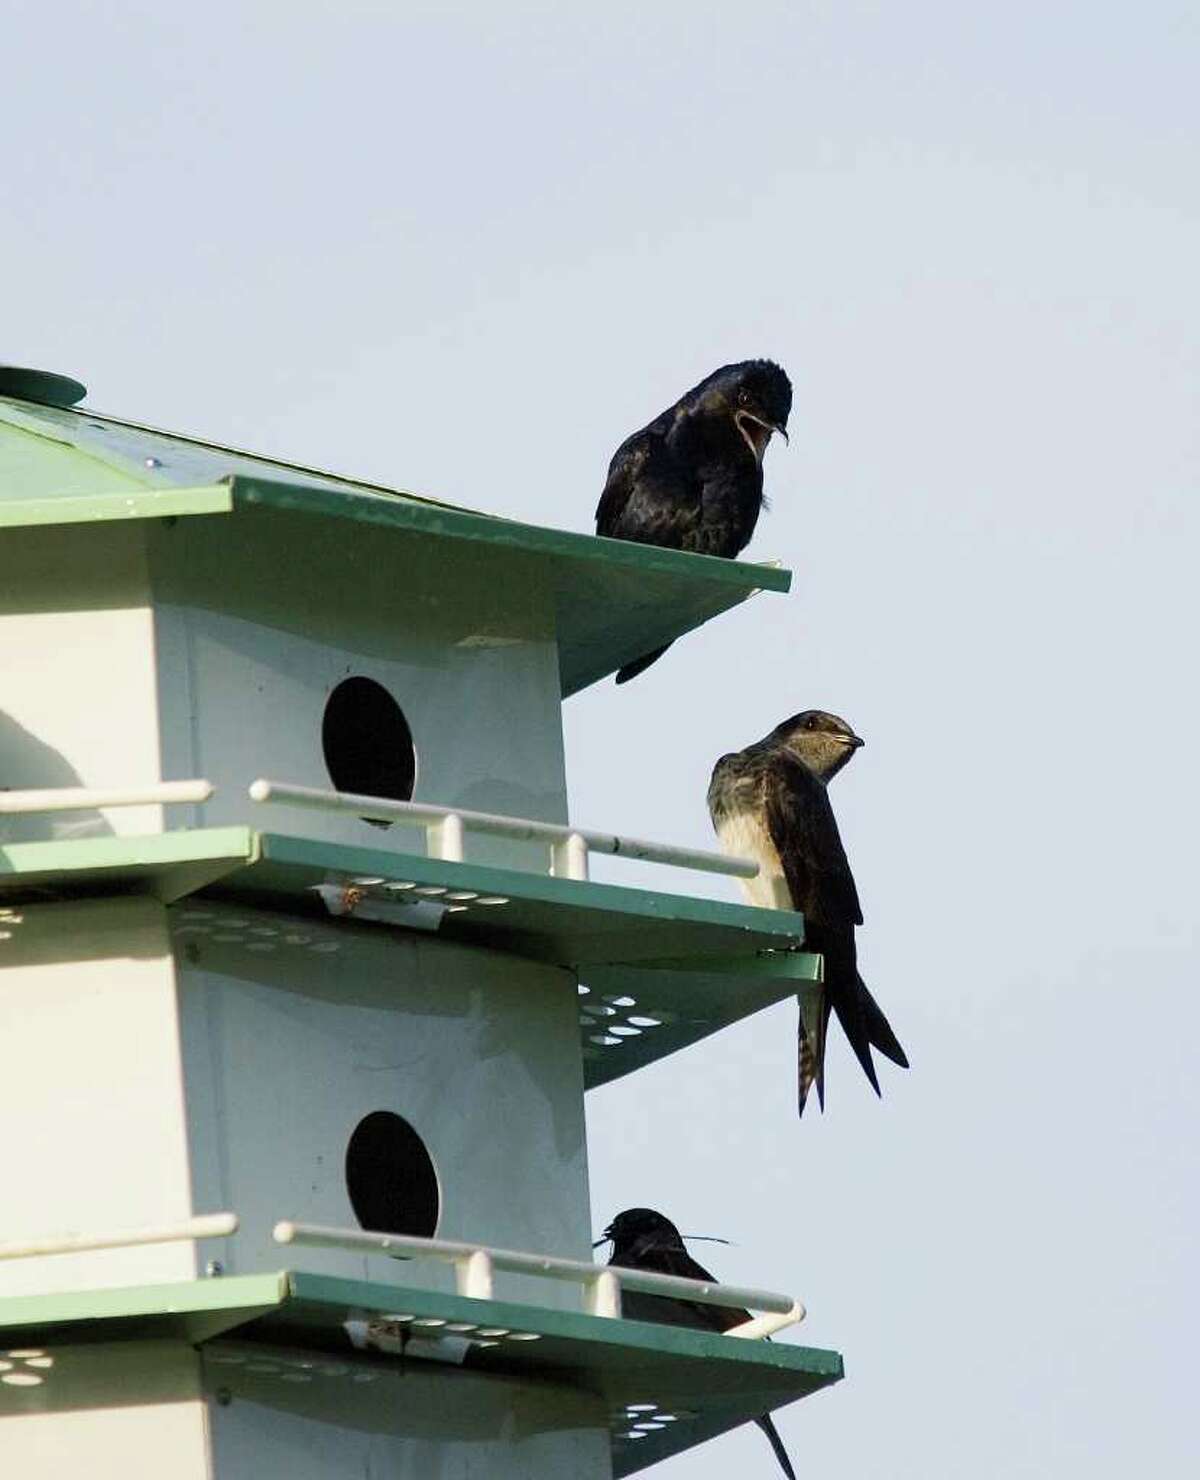 Purple martins are returning to their nesting locations all over Texas. Photo Credit: Kathy Adams Clark. Restricted use.